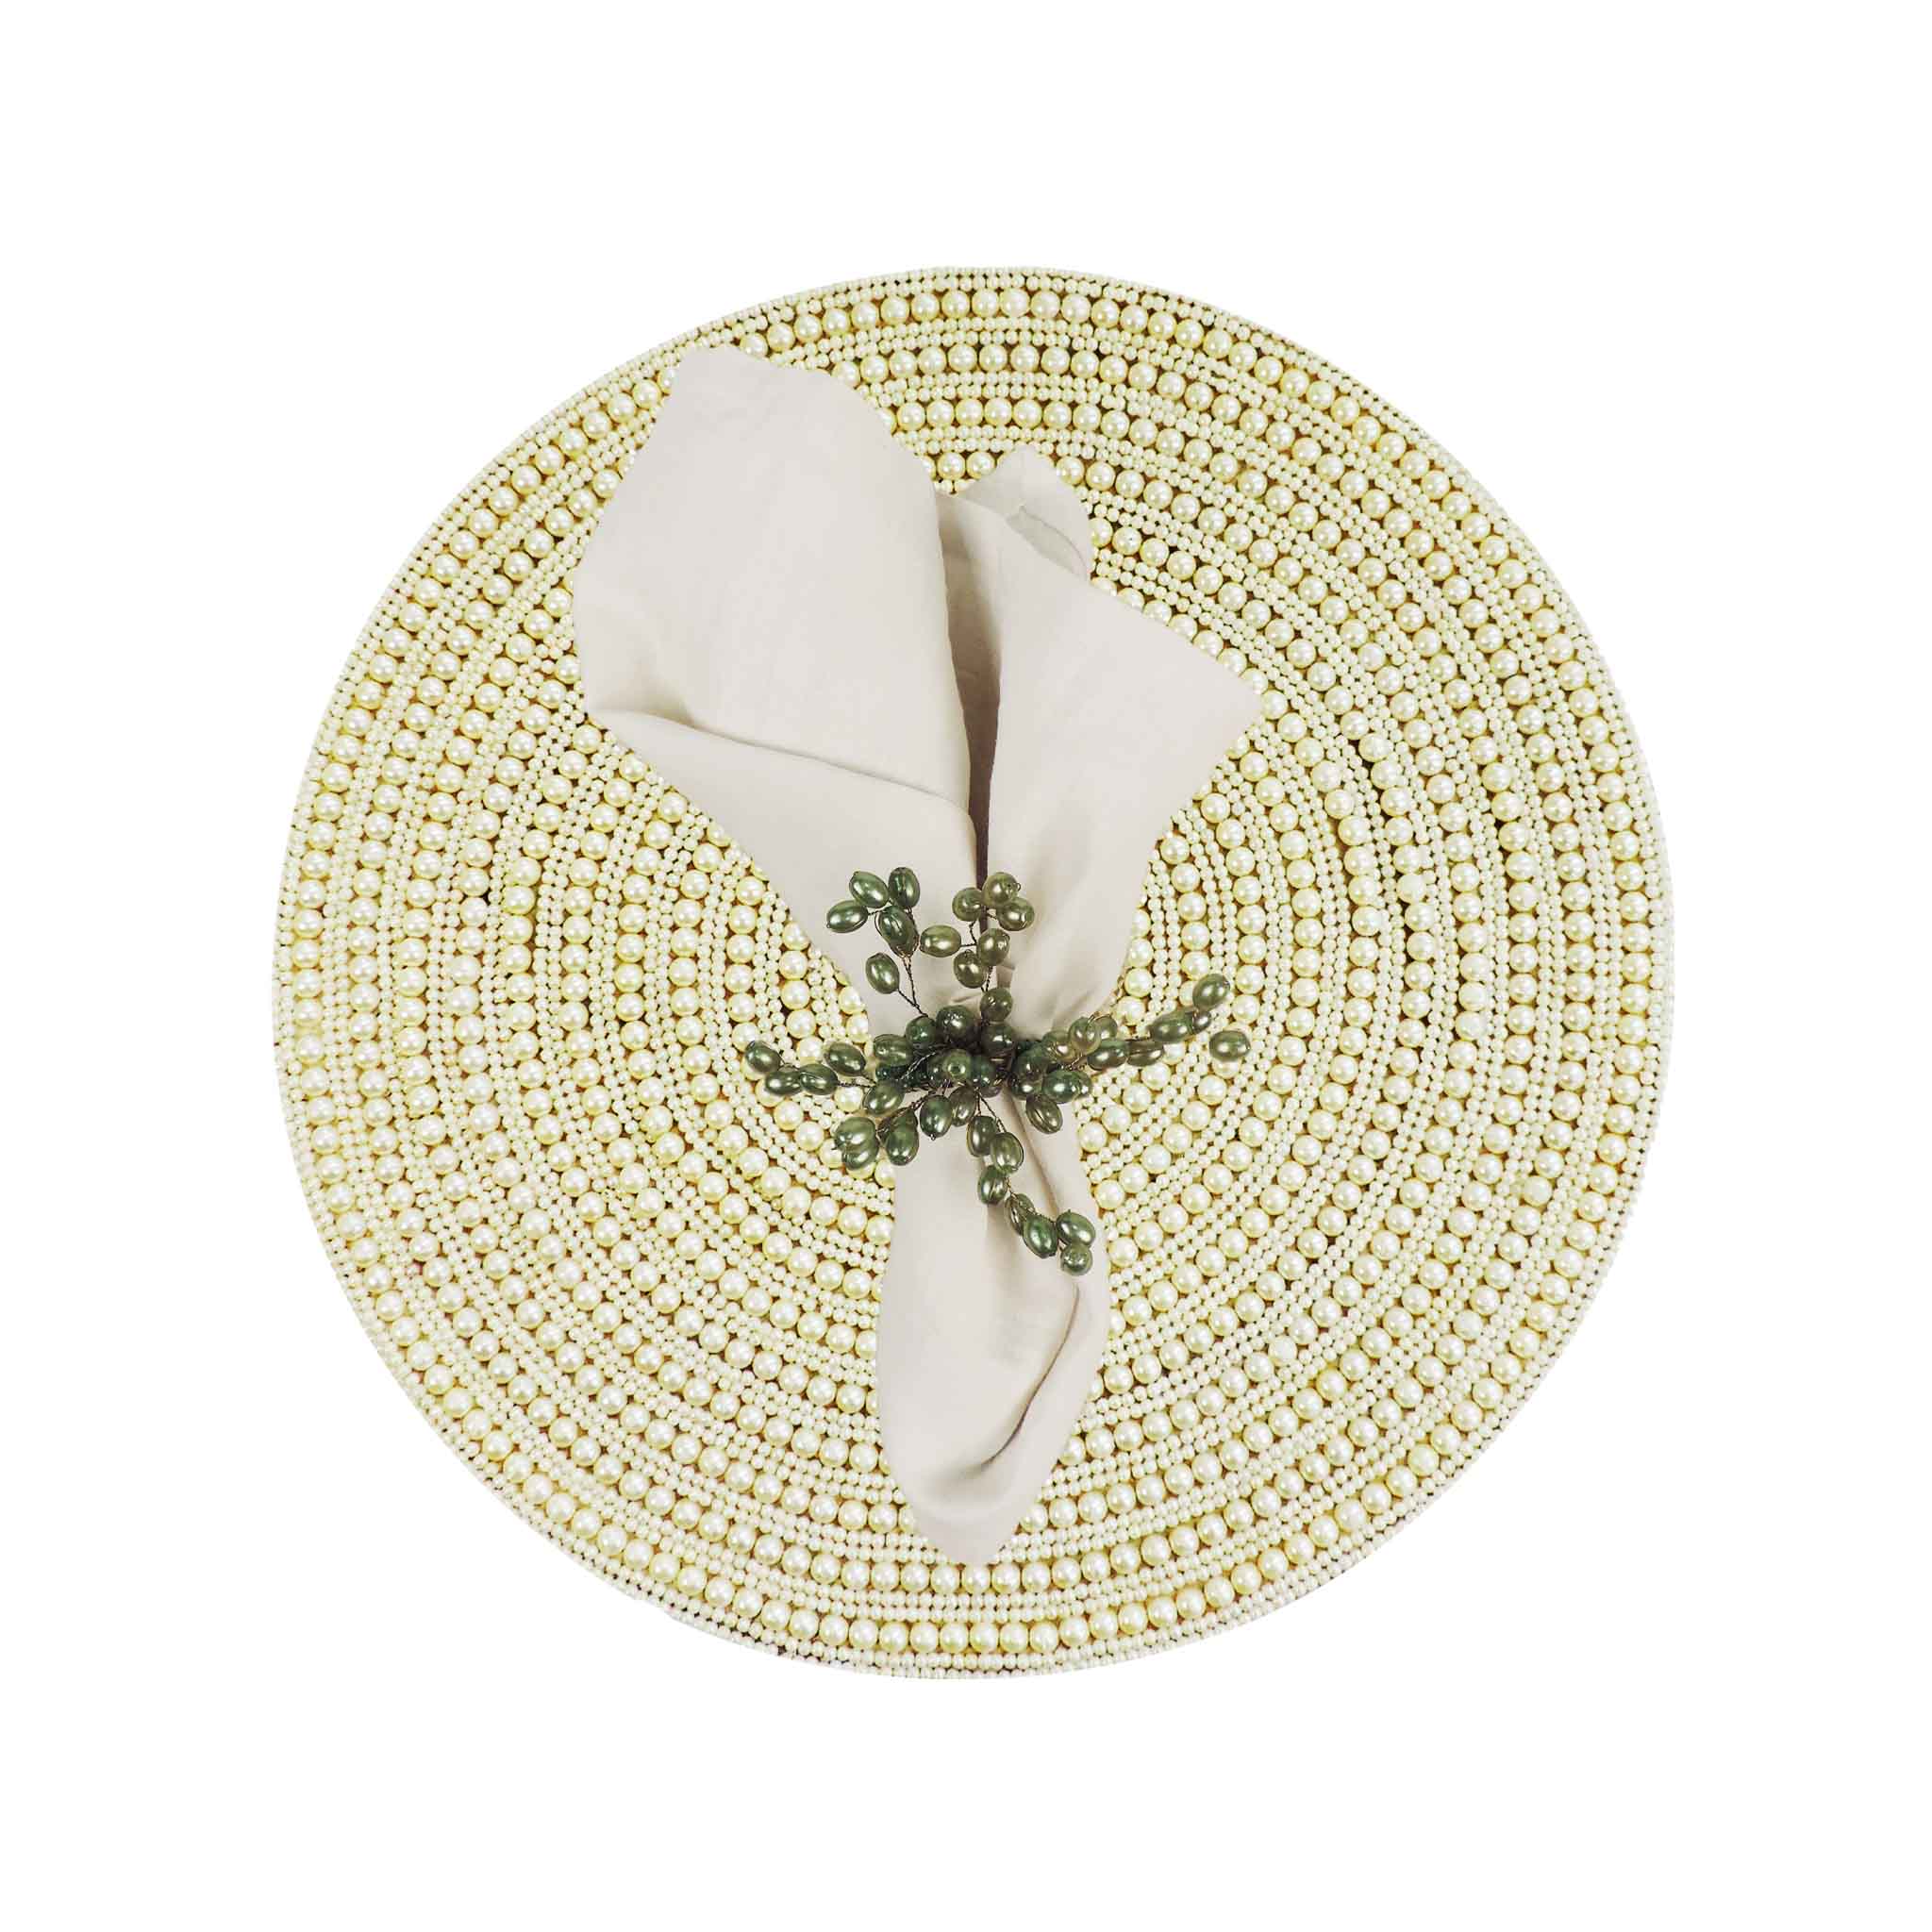 Whirl Bead Table Setting for 4 -  Embroidered Placemats, Coasters & Napkin Rings in Cream